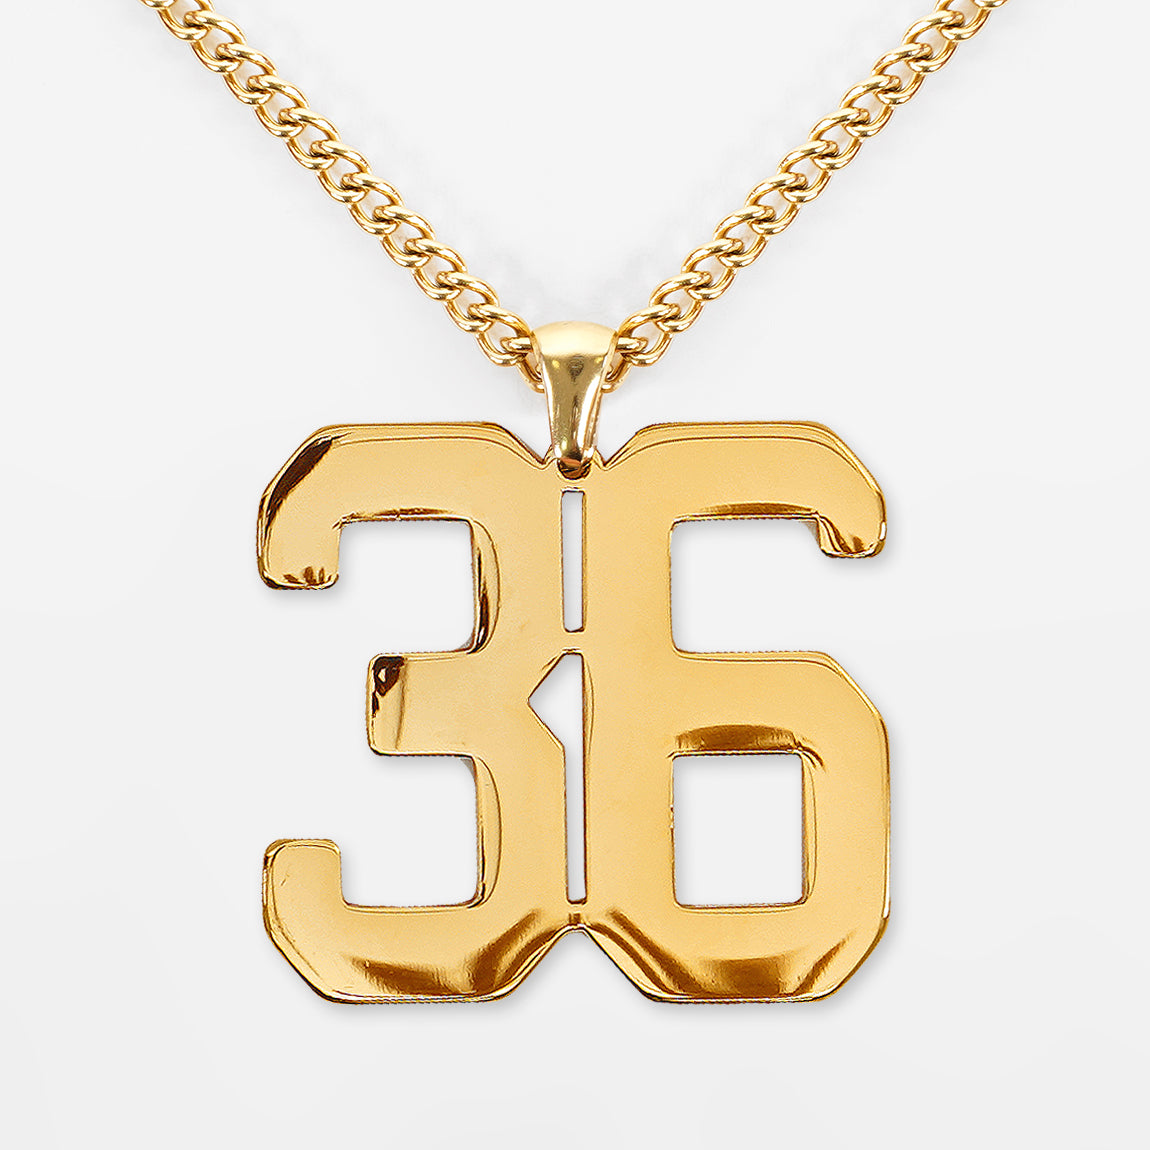 36 Number Pendant with Chain Necklace - Gold Plated Stainless Steel